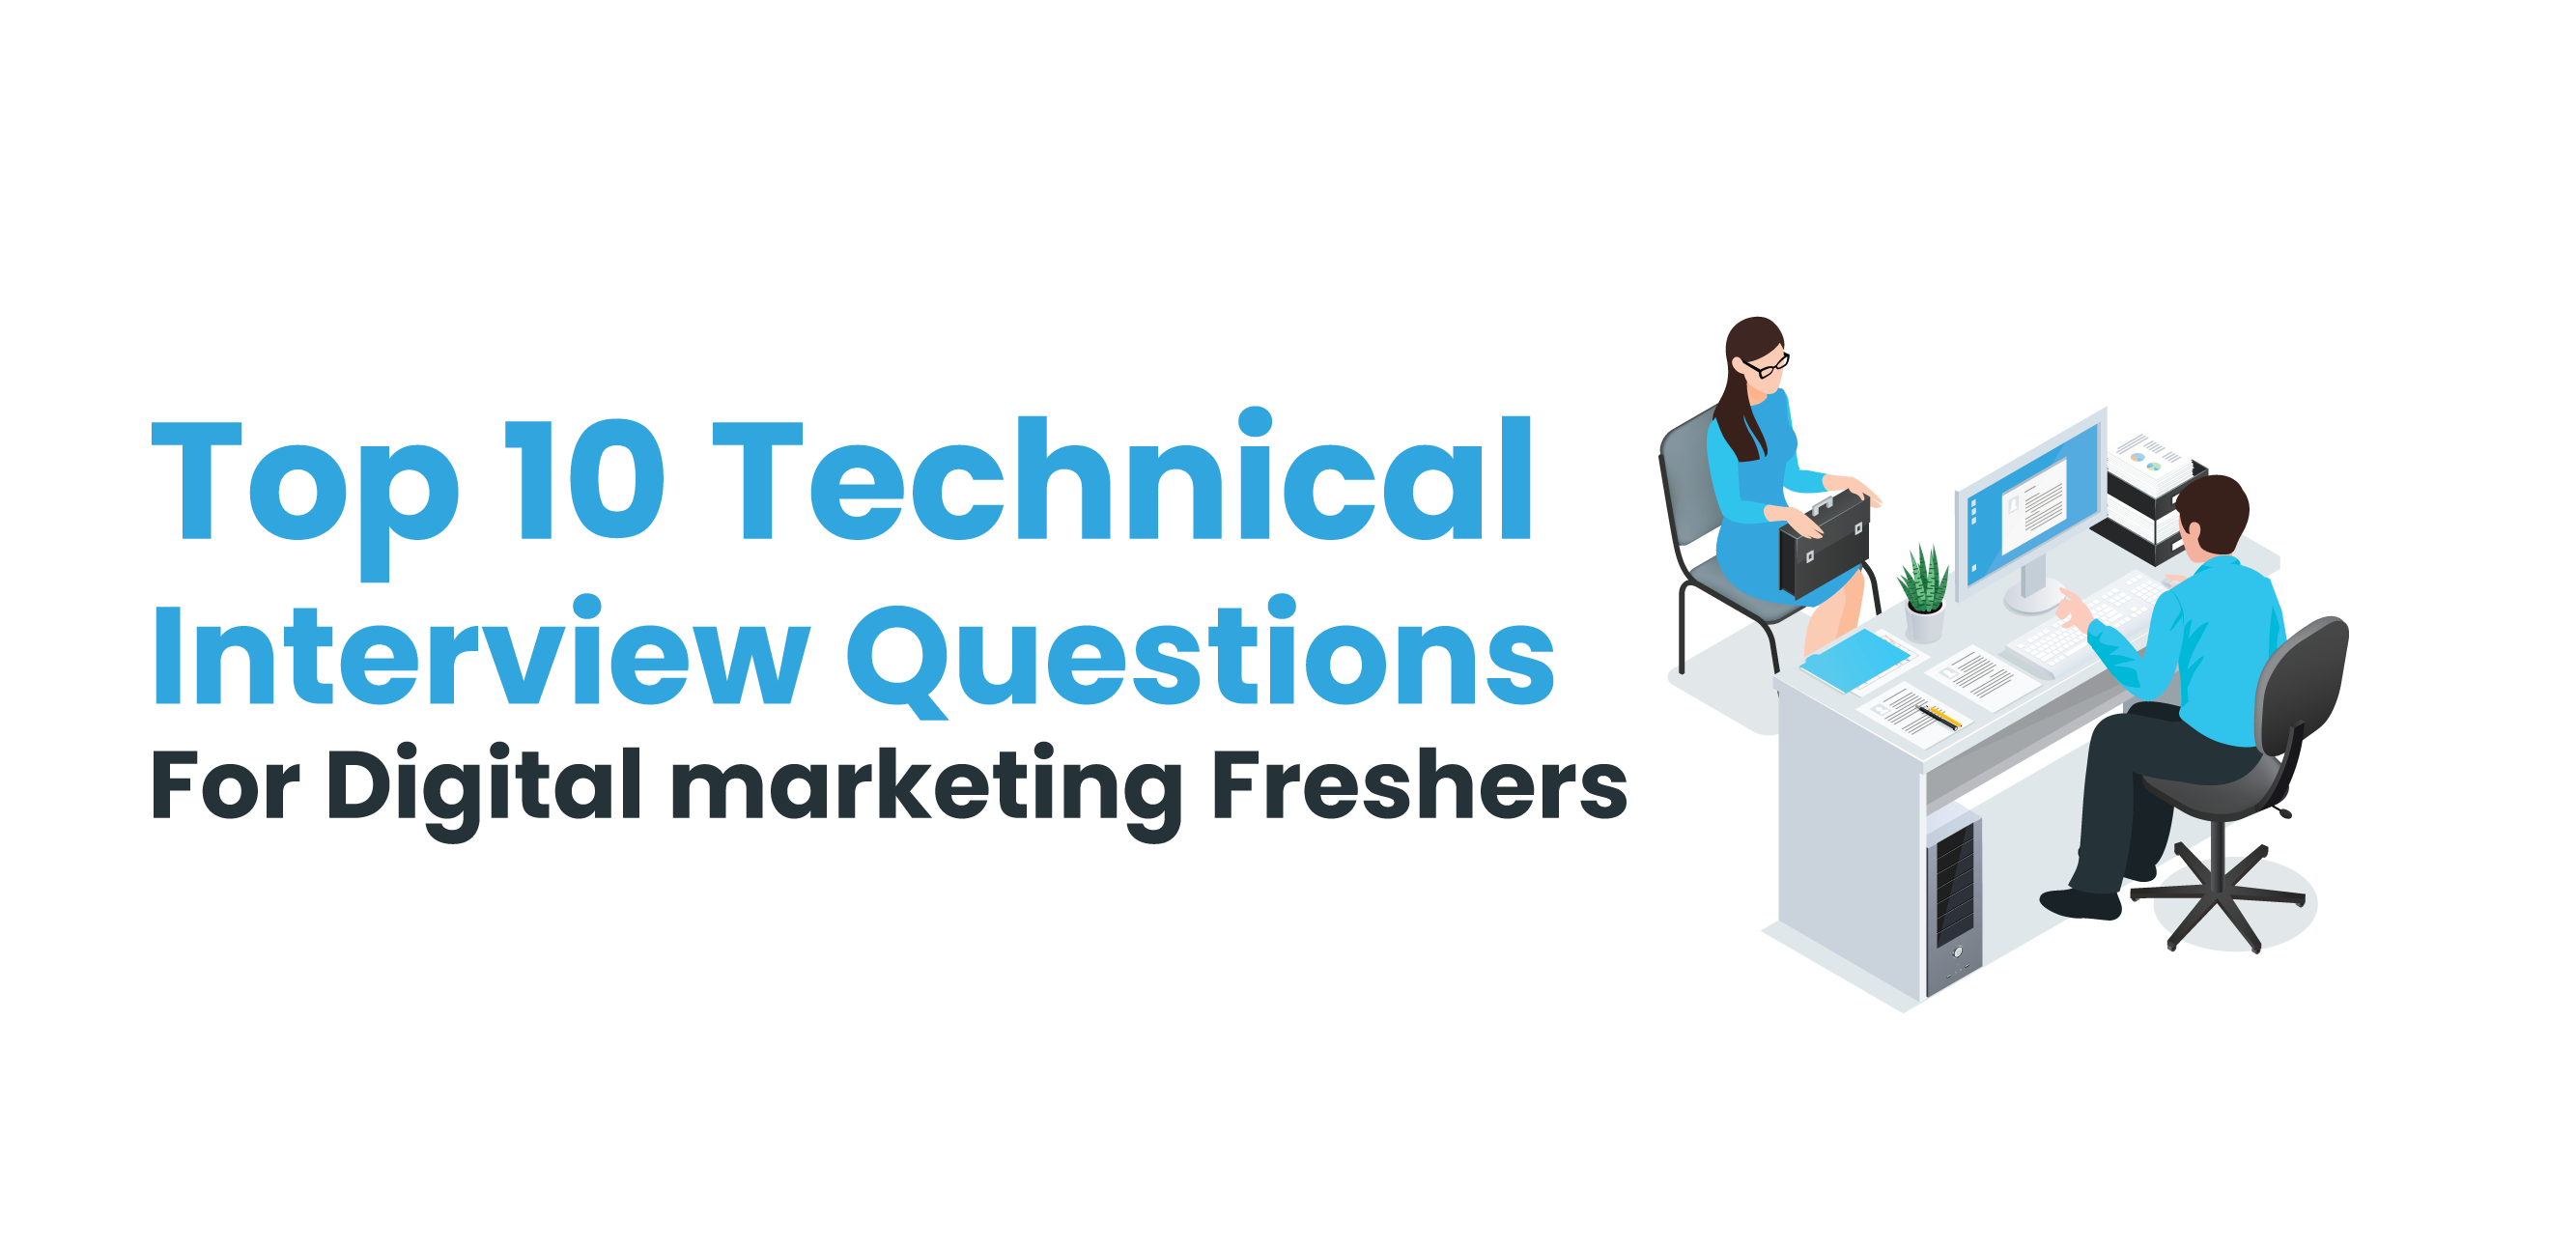 Top 10 Technical Interview Questions for Digital marketing Freshers